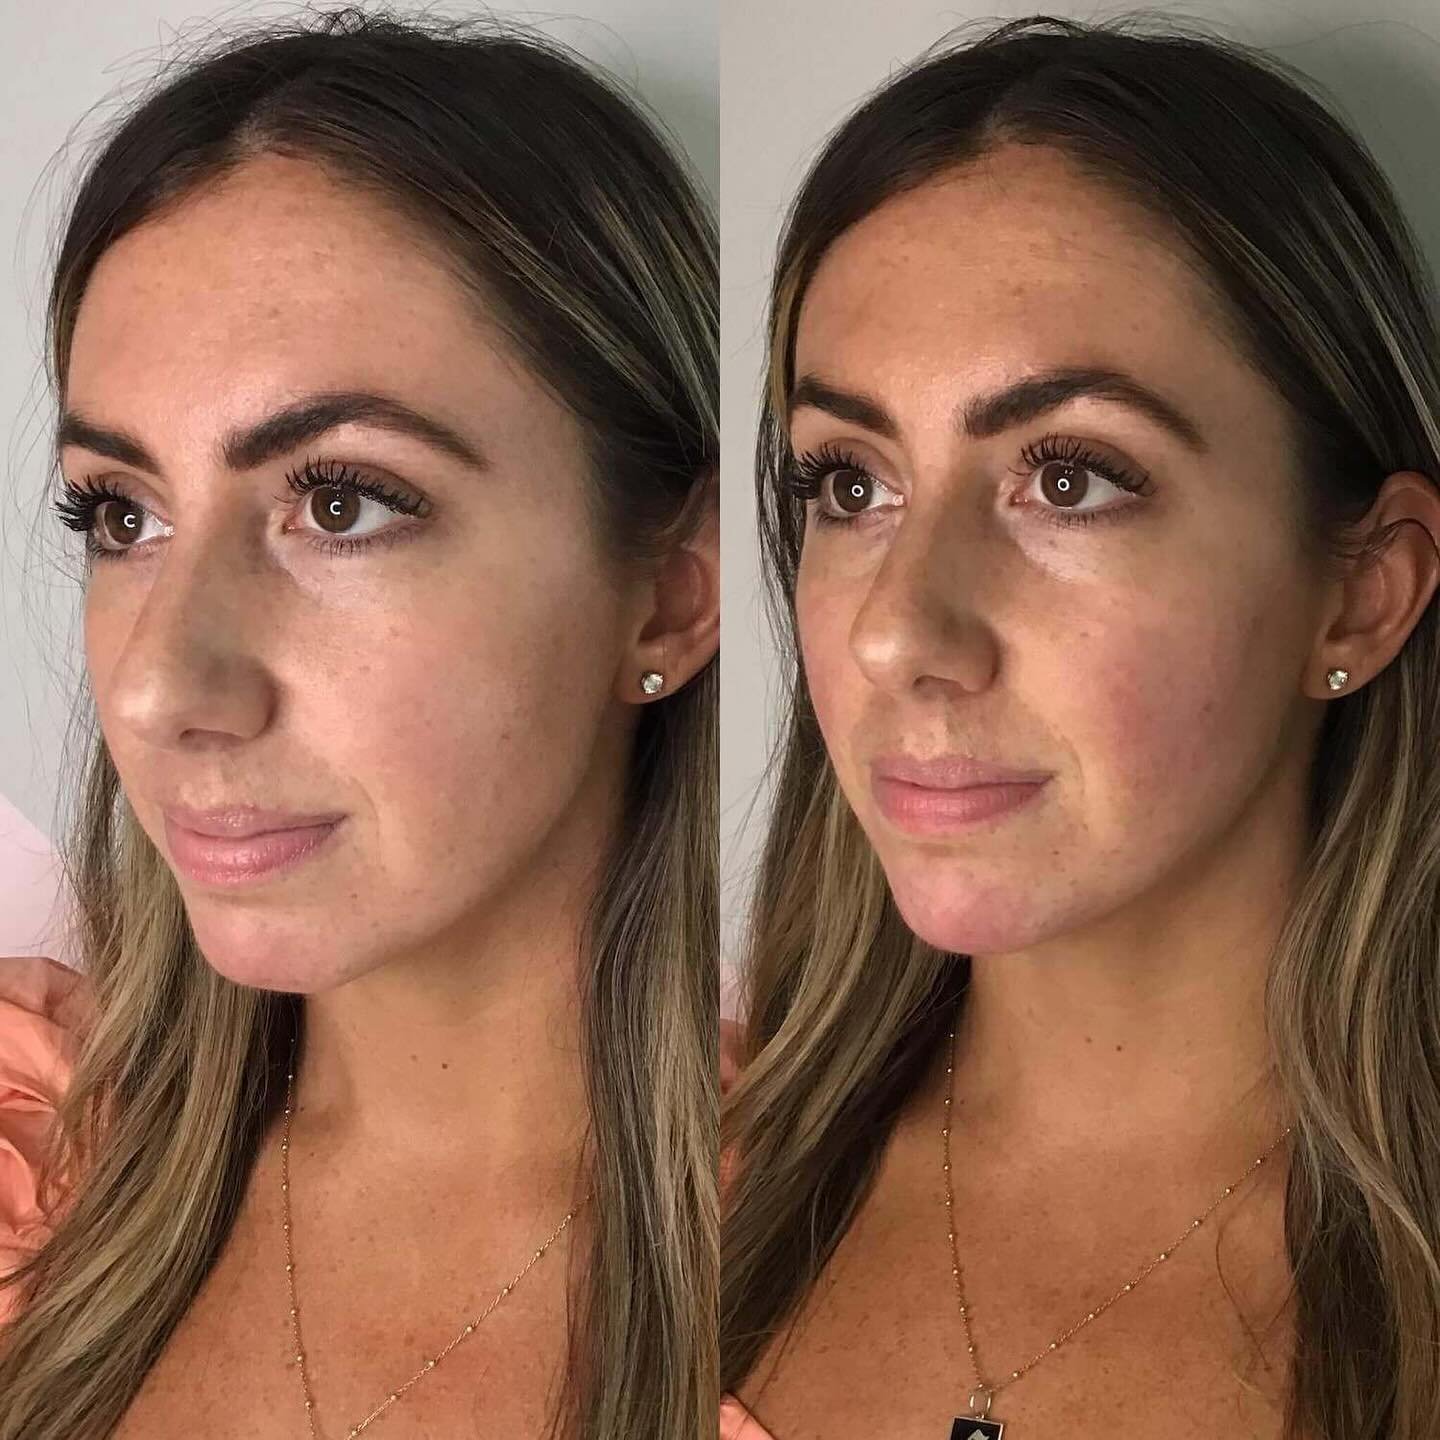 Proof that adding subtle volume to the cheeks and chin can make all the difference. ✨

Just addressing the cheeks would have thrown off her facial proportions, so. we opted for also treating her chin. The result? A seamlessly blended look that&rsquo;